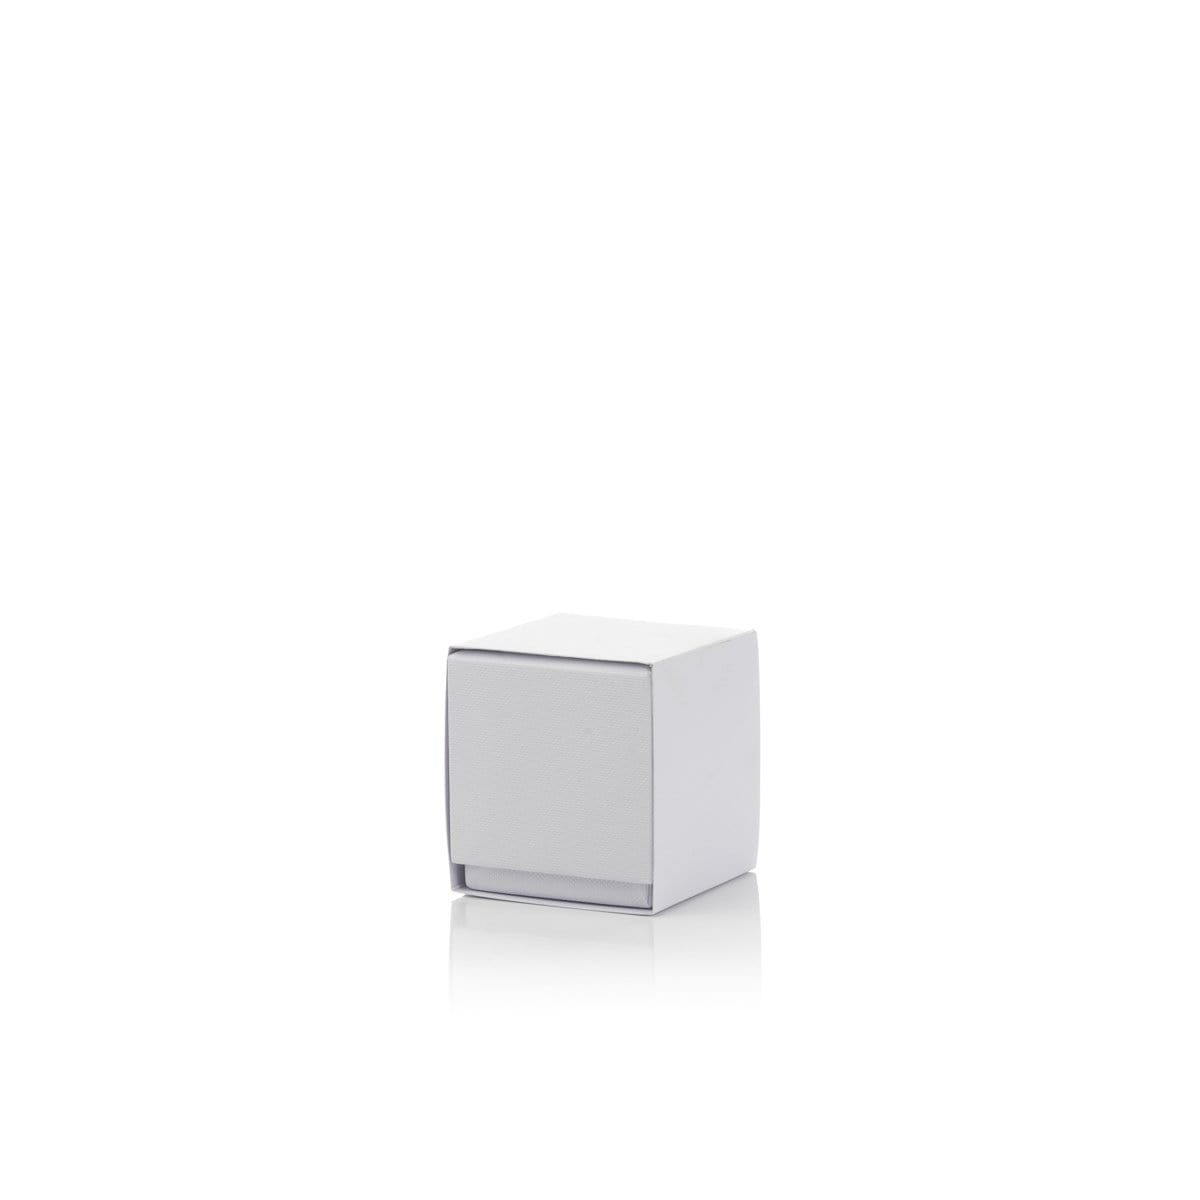 Candle Shack Candle Box Sleeve for Rigid 9cl Box - White (Lauren & Meredith)